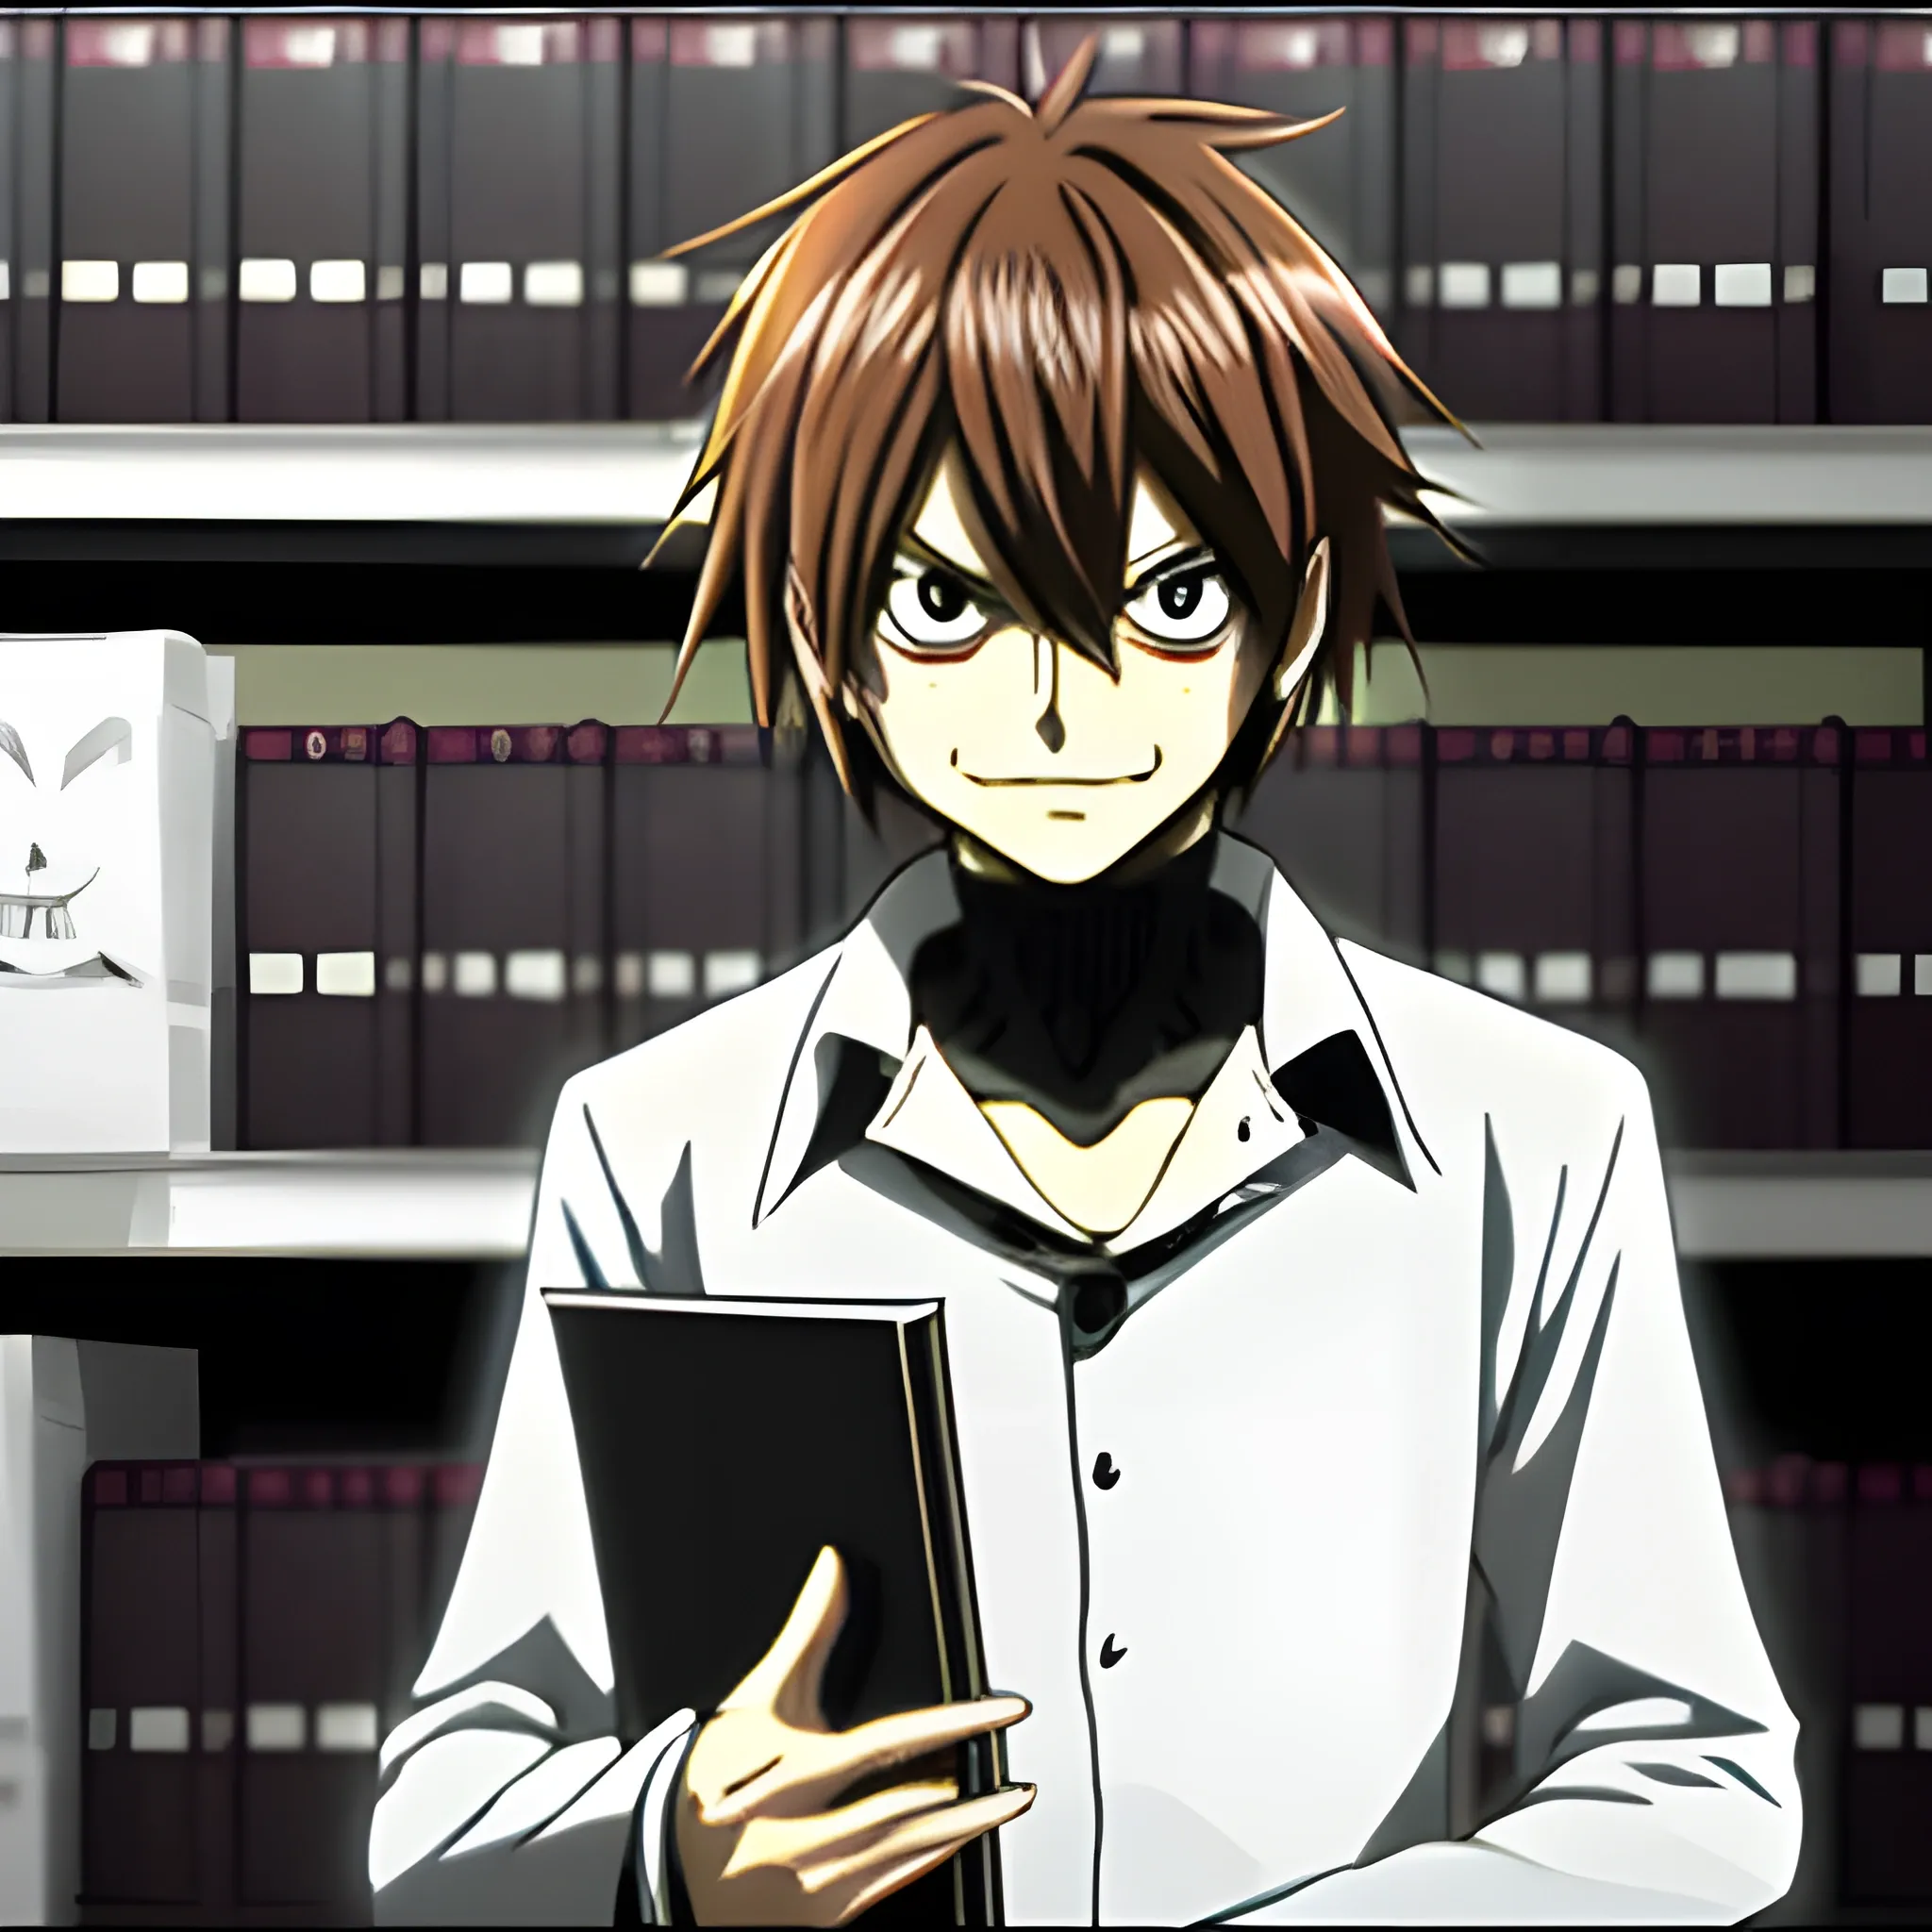 How to be the next L Lawliet from Death Note